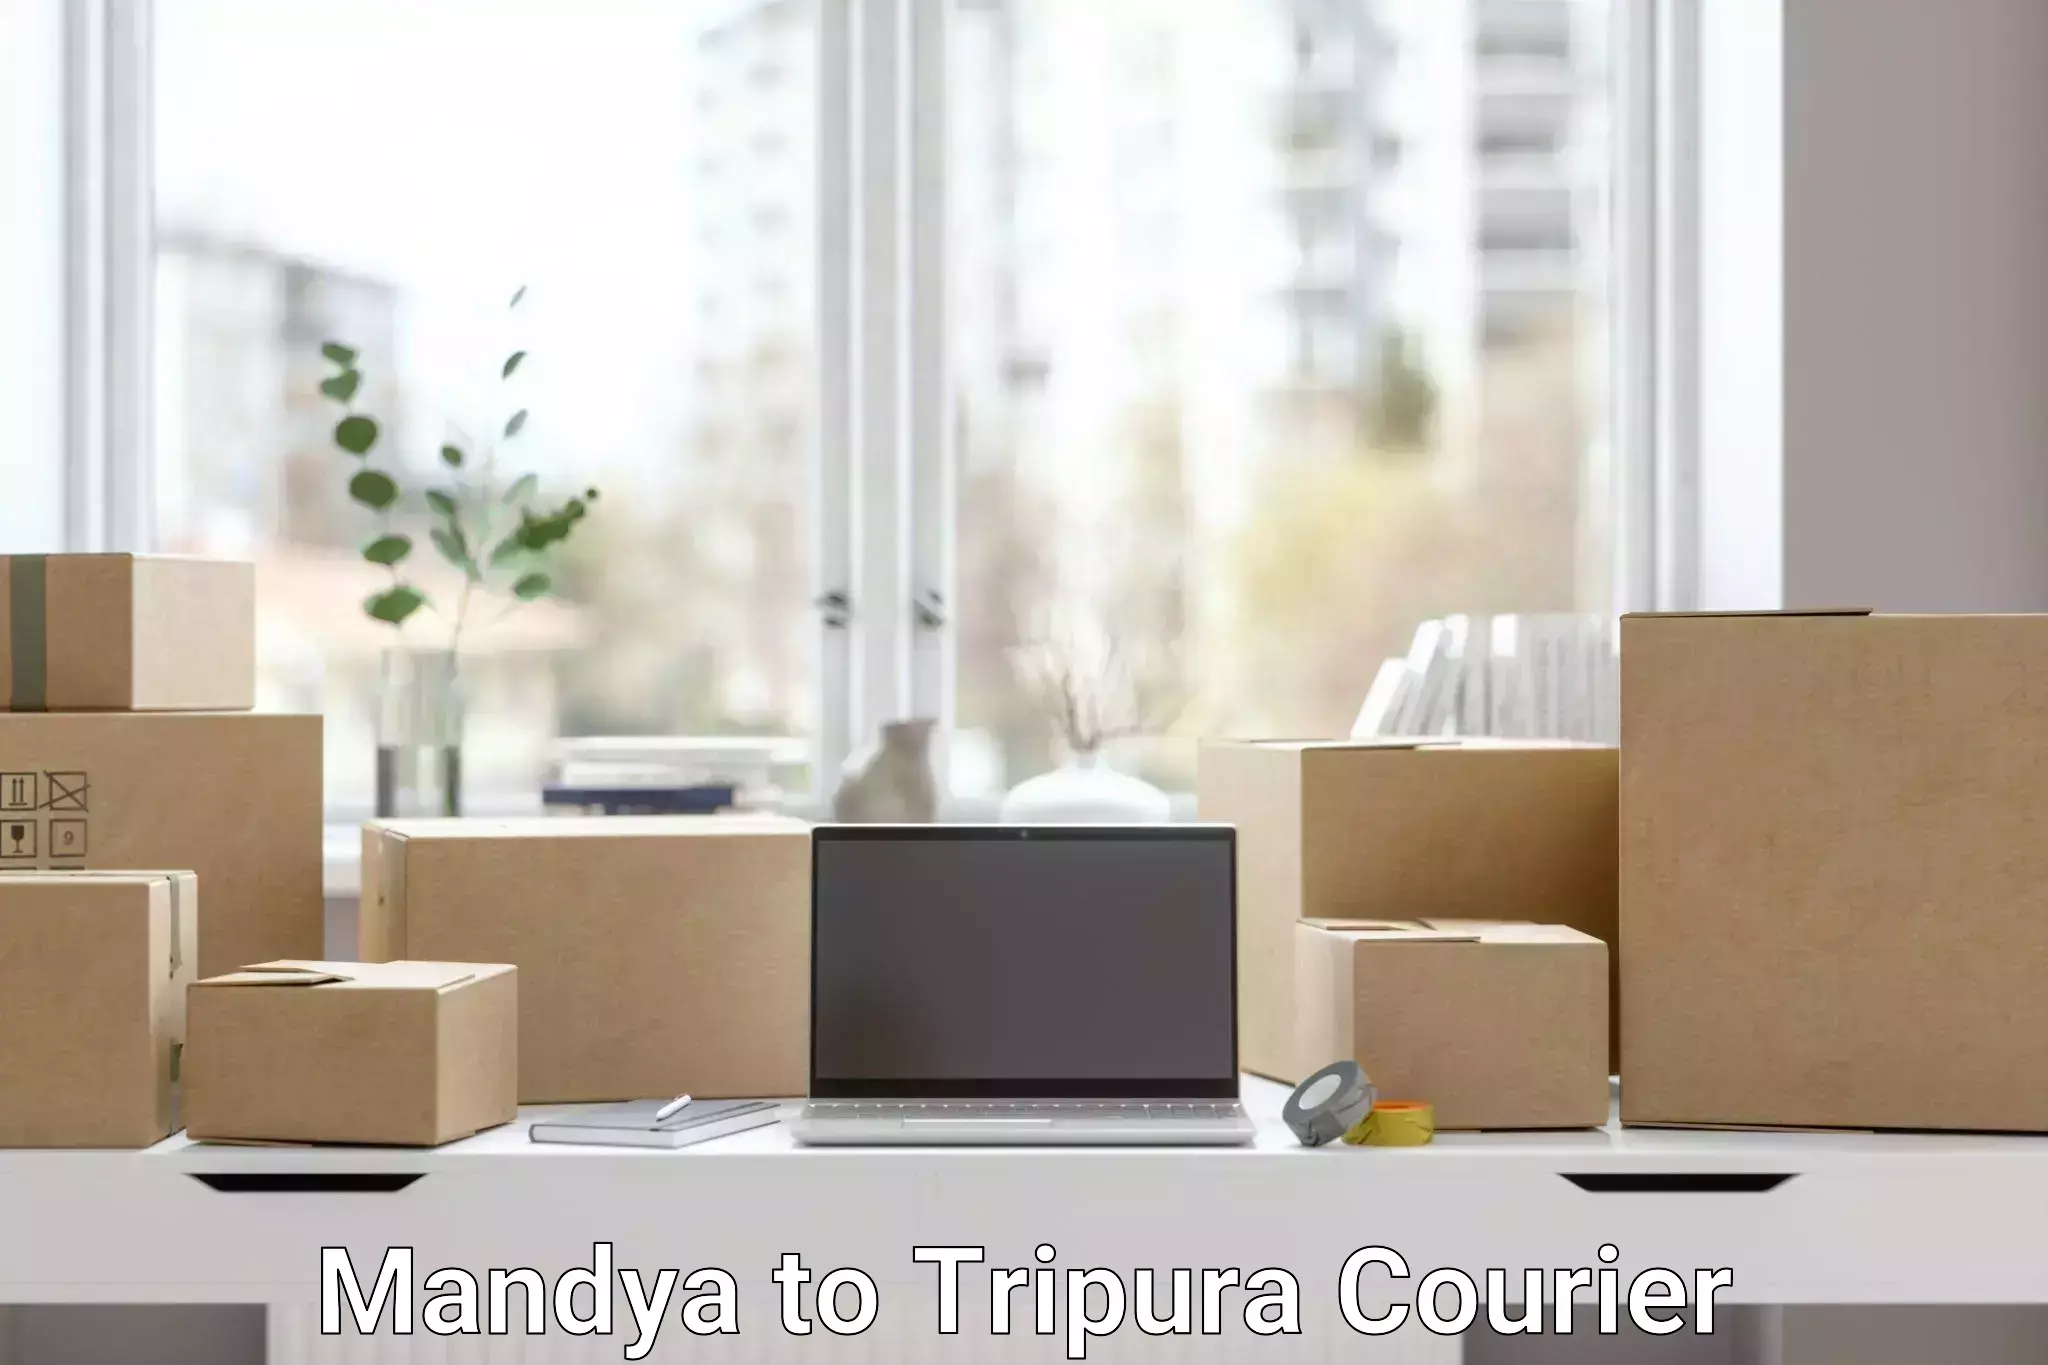 Next-day delivery options Mandya to Udaipur Tripura